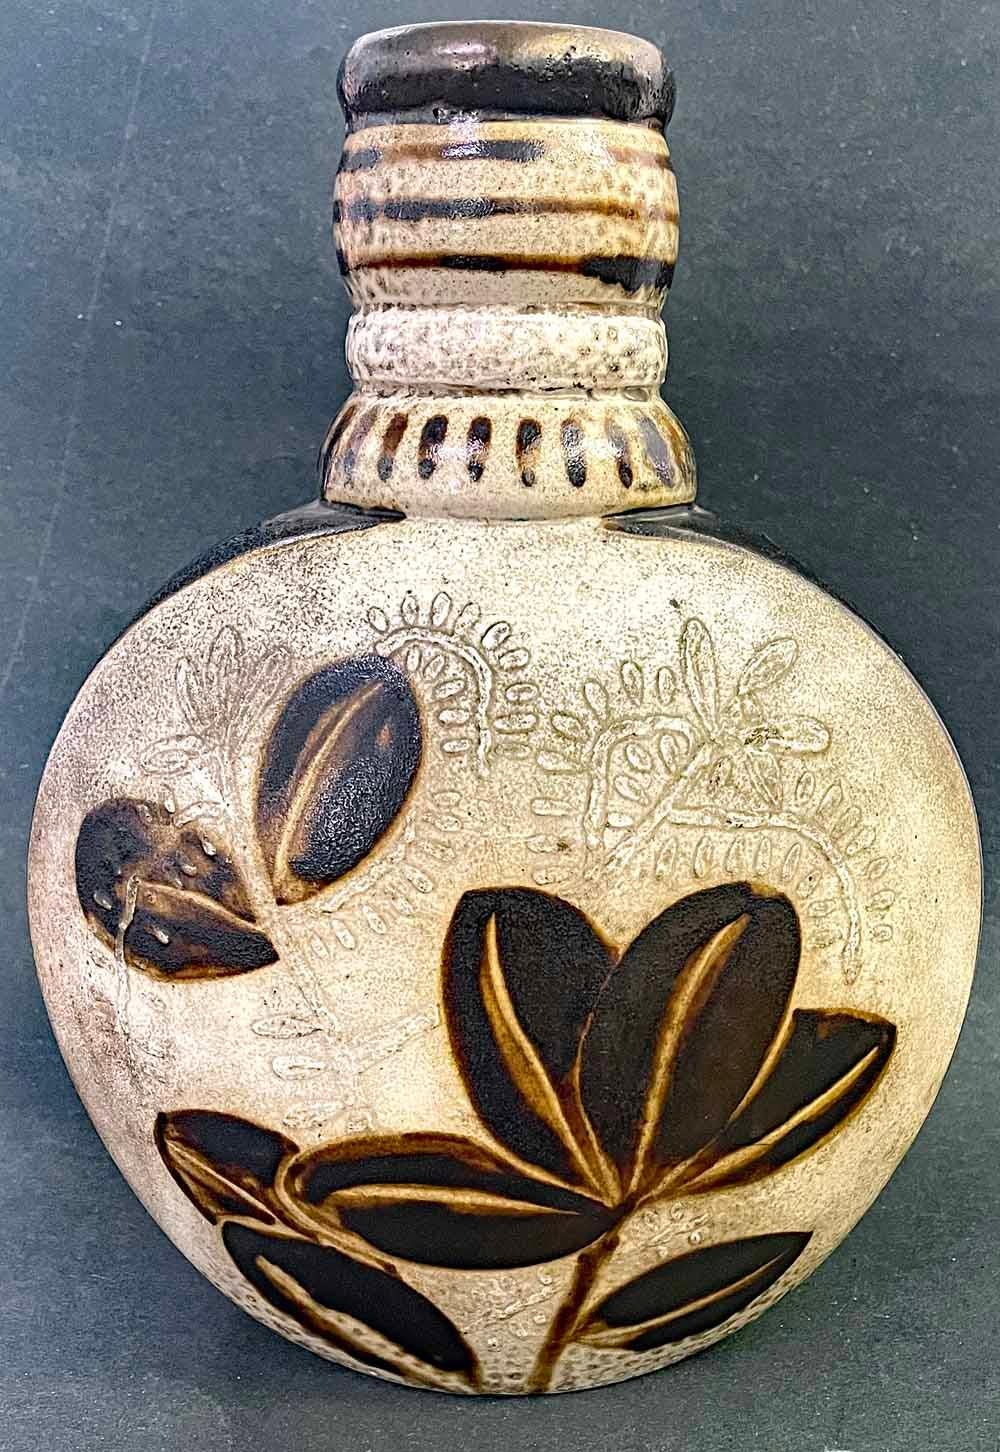 Large and substantial, this unique bottle-form vase features a lion and antelope on one side, and a branch with leaves on the other, all glazed in rich deep brown and ivory.  Each side includes botanical forms in low relief in the background.  The